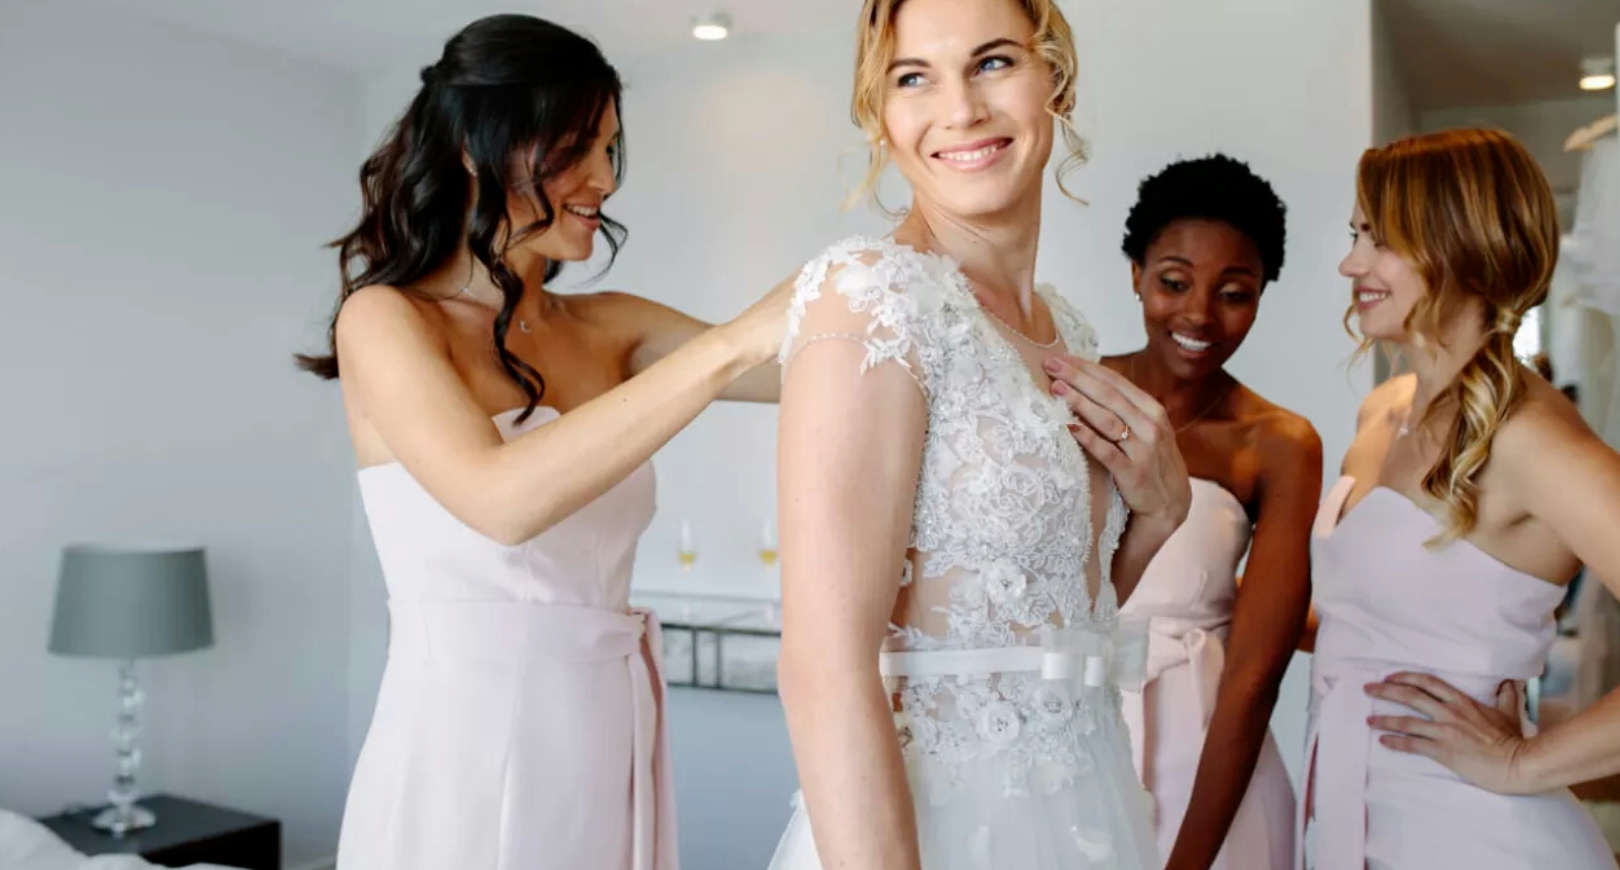 What to Bring to a Bridesmaid Dress Fitting